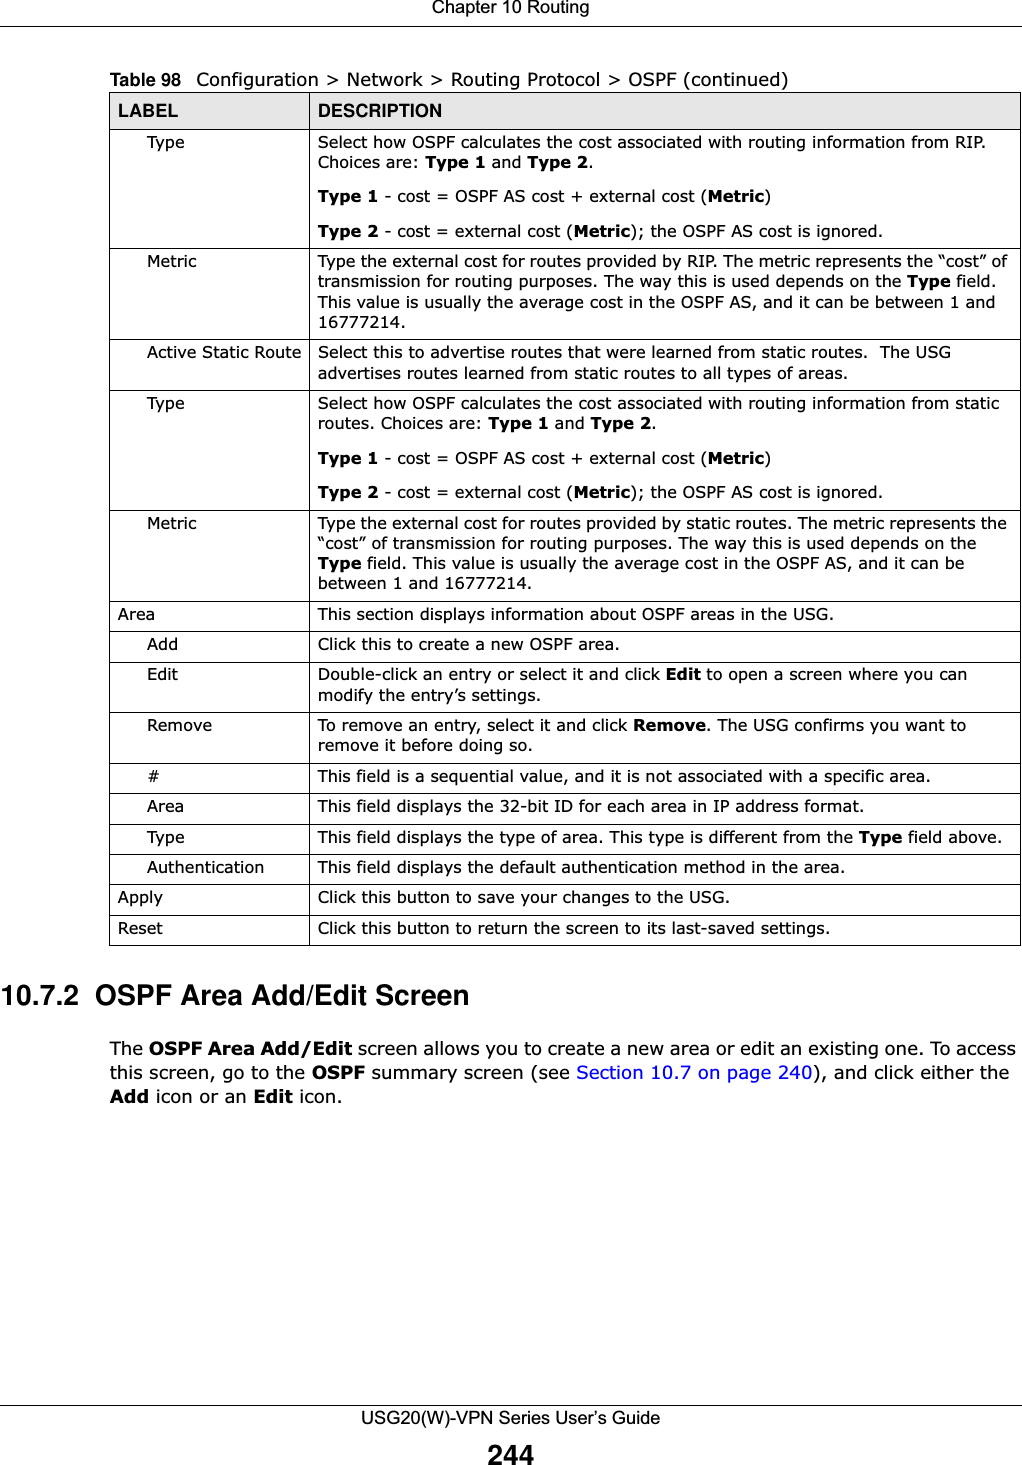 Chapter 10 RoutingUSG20(W)-VPN Series User’s Guide24410.7.2  OSPF Area Add/Edit Screen The OSPF Area Add/Edit screen allows you to create a new area or edit an existing one. To access this screen, go to the OSPF summary screen (see Section 10.7 on page 240), and click either the Add icon or an Edit icon.Type Select how OSPF calculates the cost associated with routing information from RIP. Choices are: Type 1 and Type 2.Type 1 - cost = OSPF AS cost + external cost (Metric)Type 2 - cost = external cost (Metric); the OSPF AS cost is ignored.Metric Type the external cost for routes provided by RIP. The metric represents the “cost” of transmission for routing purposes. The way this is used depends on the Type field. This value is usually the average cost in the OSPF AS, and it can be between 1 and 16777214.Active Static Route Select this to advertise routes that were learned from static routes.  The USG advertises routes learned from static routes to all types of areas.Type Select how OSPF calculates the cost associated with routing information from static routes. Choices are: Type 1 and Type 2.Type 1 - cost = OSPF AS cost + external cost (Metric)Type 2 - cost = external cost (Metric); the OSPF AS cost is ignored.Metric Type the external cost for routes provided by static routes. The metric represents the “cost” of transmission for routing purposes. The way this is used depends on the Type field. This value is usually the average cost in the OSPF AS, and it can be between 1 and 16777214.Area This section displays information about OSPF areas in the USG.Add Click this to create a new OSPF area.Edit Double-click an entry or select it and click Edit to open a screen where you can modify the entry’s settings. Remove To remove an entry, select it and click Remove. The USG confirms you want to remove it before doing so.# This field is a sequential value, and it is not associated with a specific area.Area This field displays the 32-bit ID for each area in IP address format.Type This field displays the type of area. This type is different from the Type field above.Authentication This field displays the default authentication method in the area.Apply Click this button to save your changes to the USG. Reset Click this button to return the screen to its last-saved settings. Table 98   Configuration &gt; Network &gt; Routing Protocol &gt; OSPF (continued)LABEL DESCRIPTION